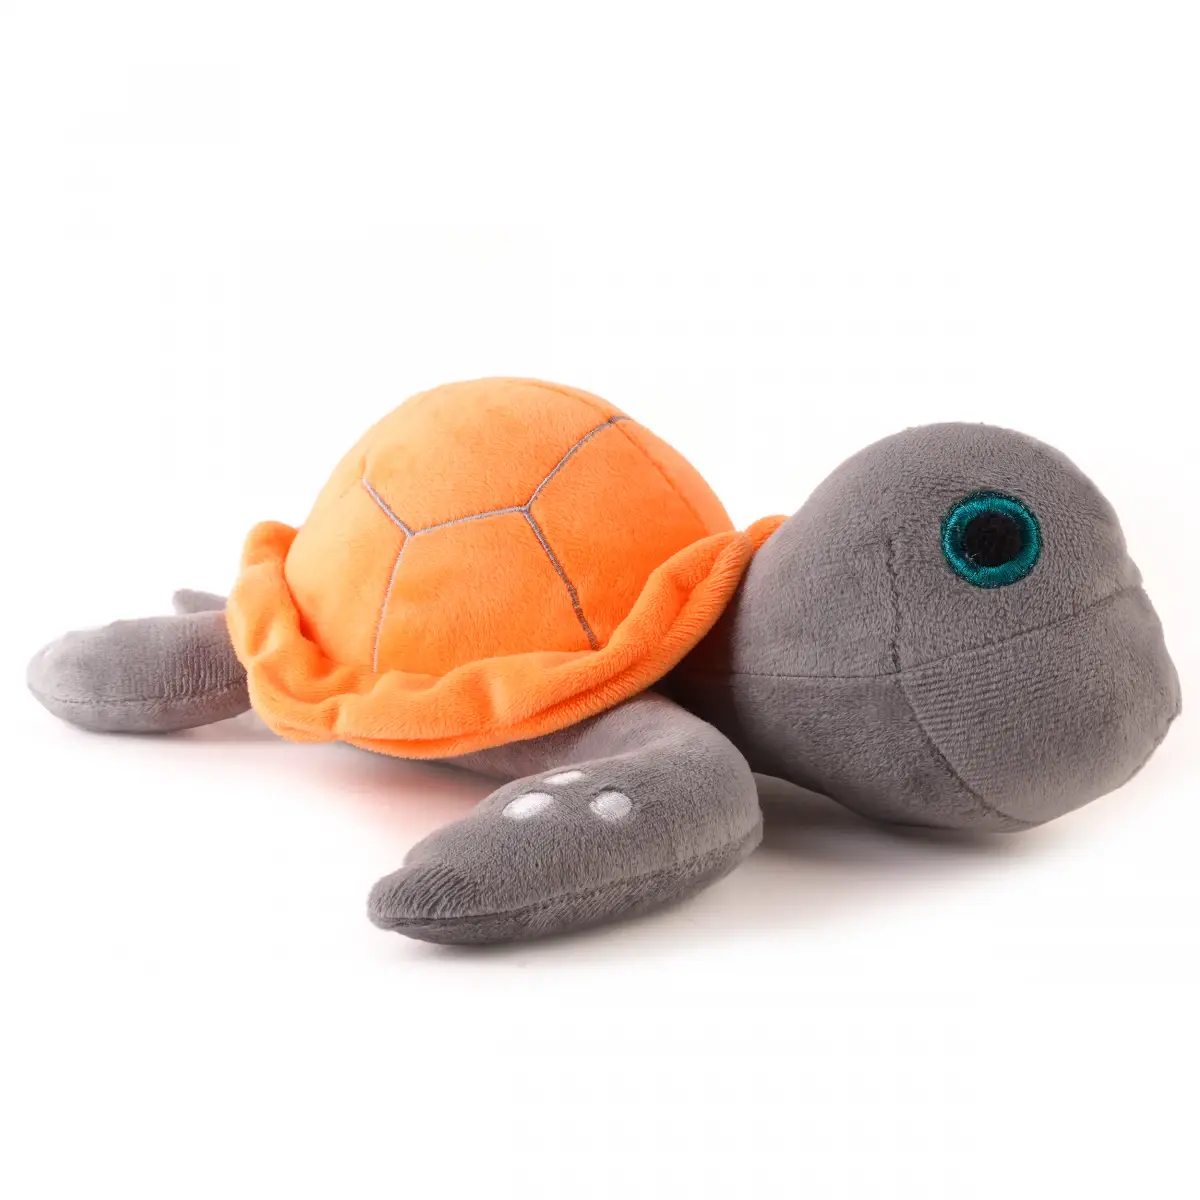 Huggable Cuddly Speedy Turtle Stuffed Toy By Fuzzbuzz, Soft Toys for Kids, Cute Plushies Orange, For Kids Of Age 2 Years & Above